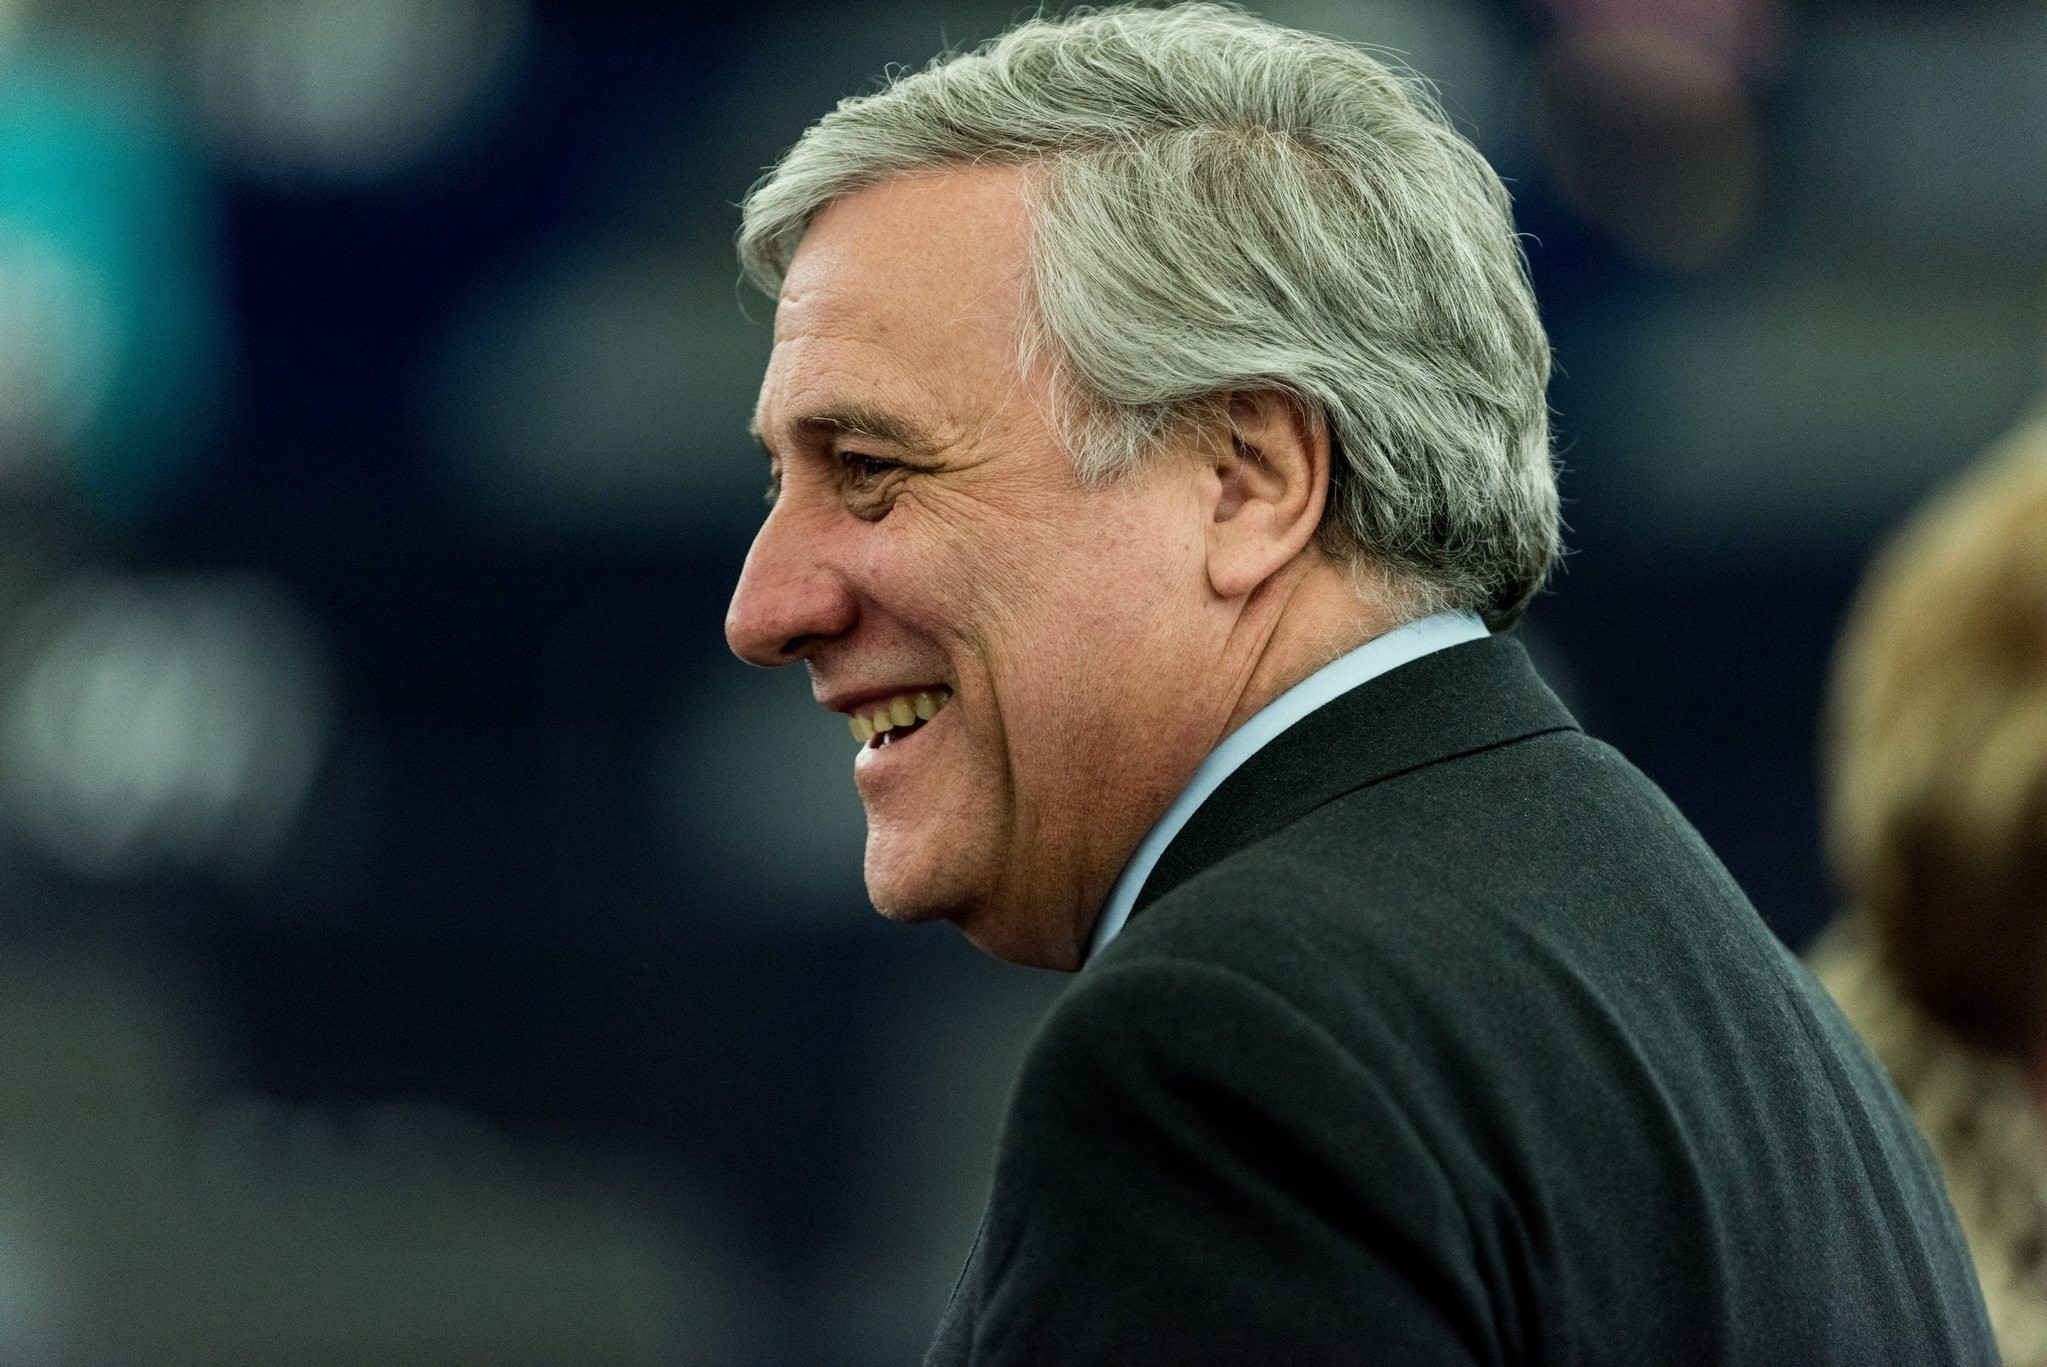 The Italian Antonio Tajani is to stand for the Group of the European People's Party (EPP) for the post of President of the Parliament. (EPA Photo)